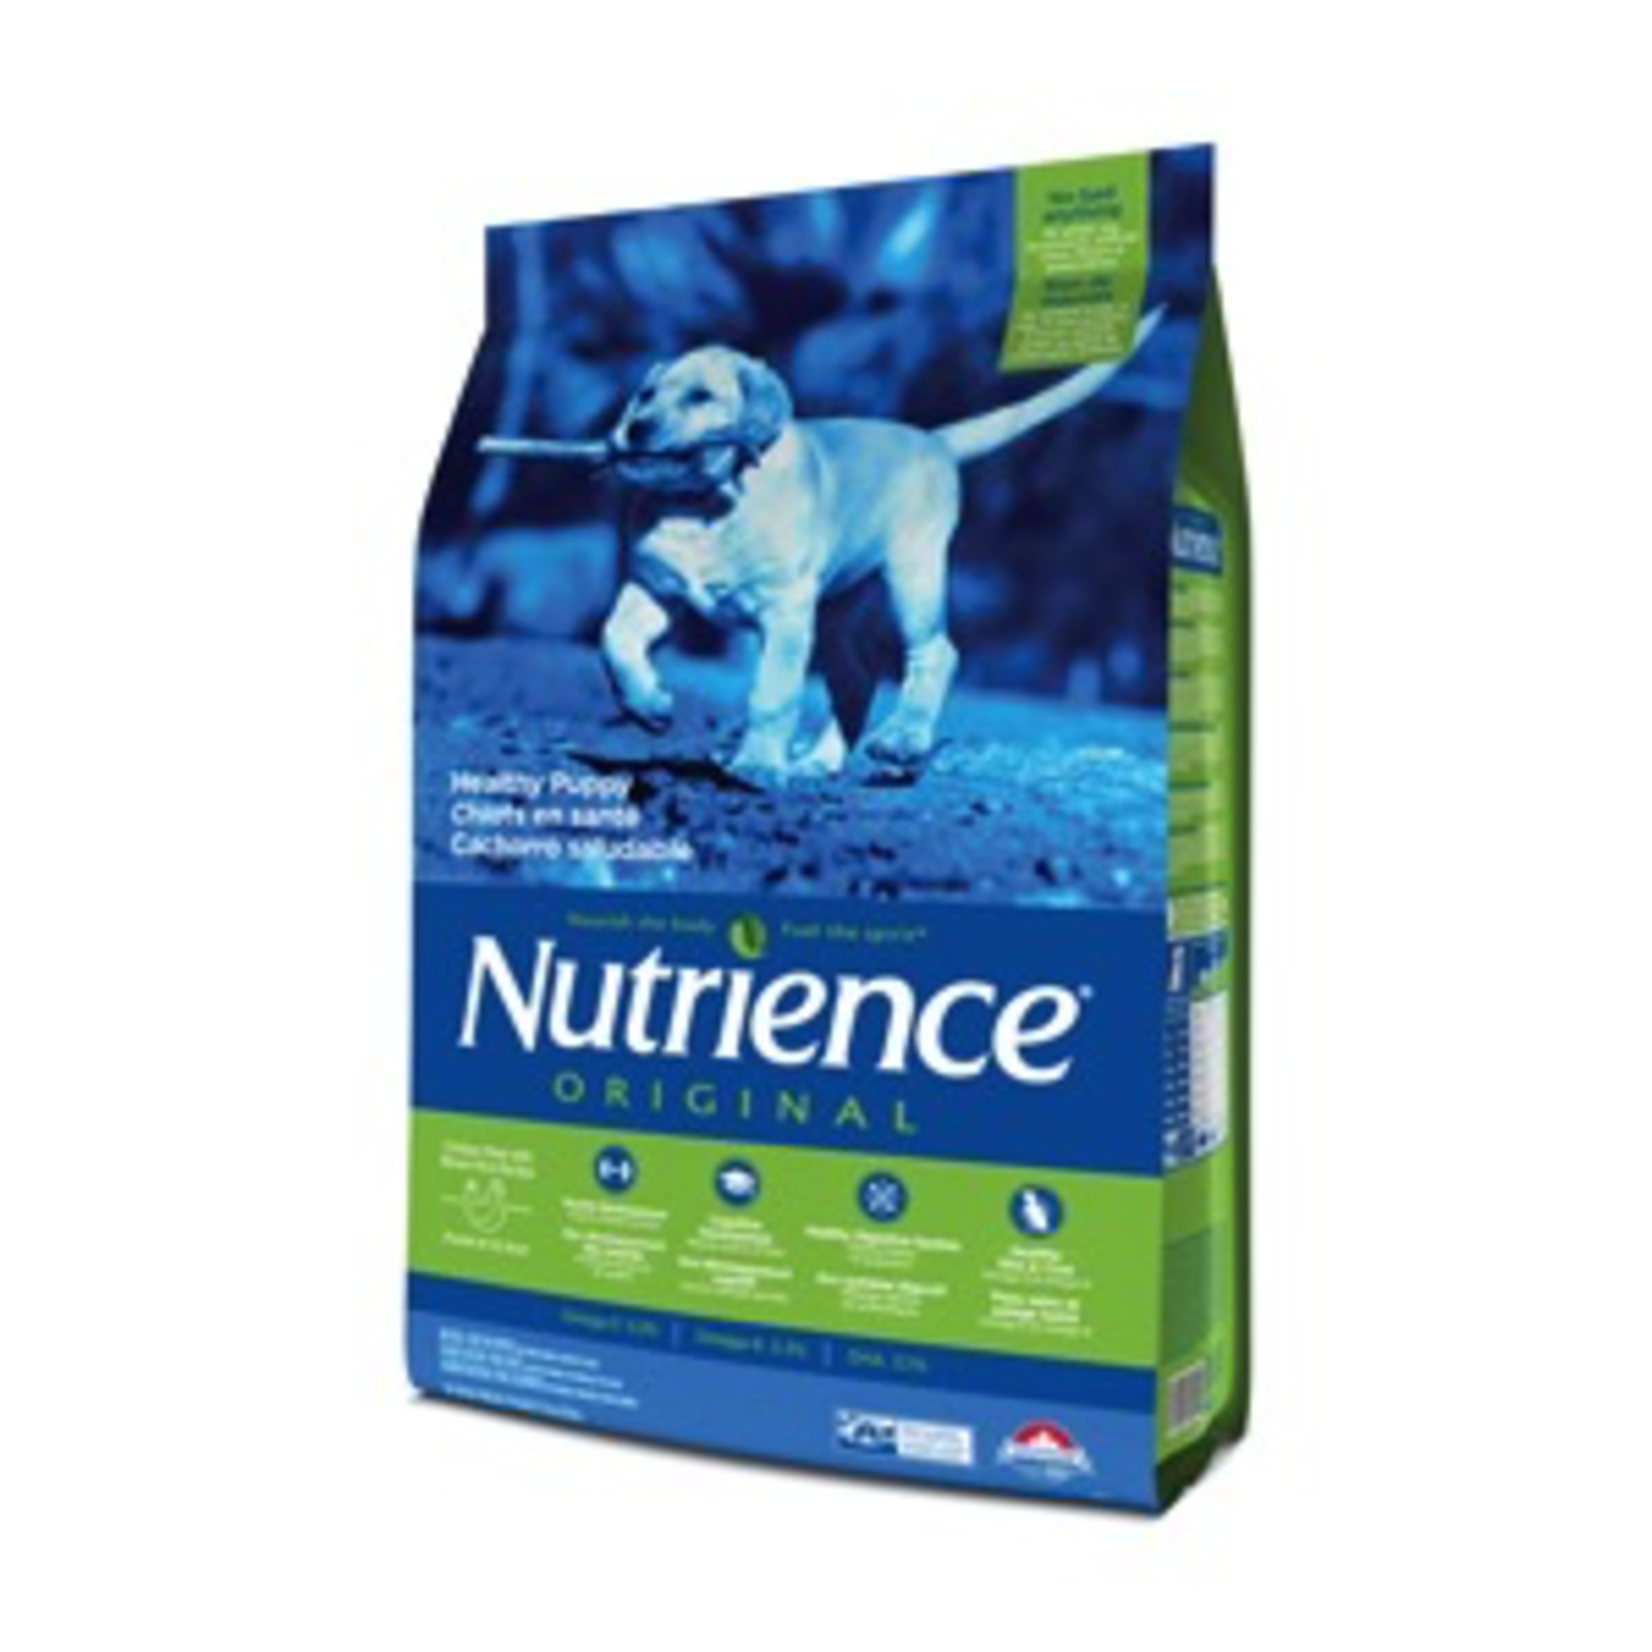 NUTRIENCE (W) Nutrience Original Healthy Puppy, Chicken Meal with Brown Rice Recipe